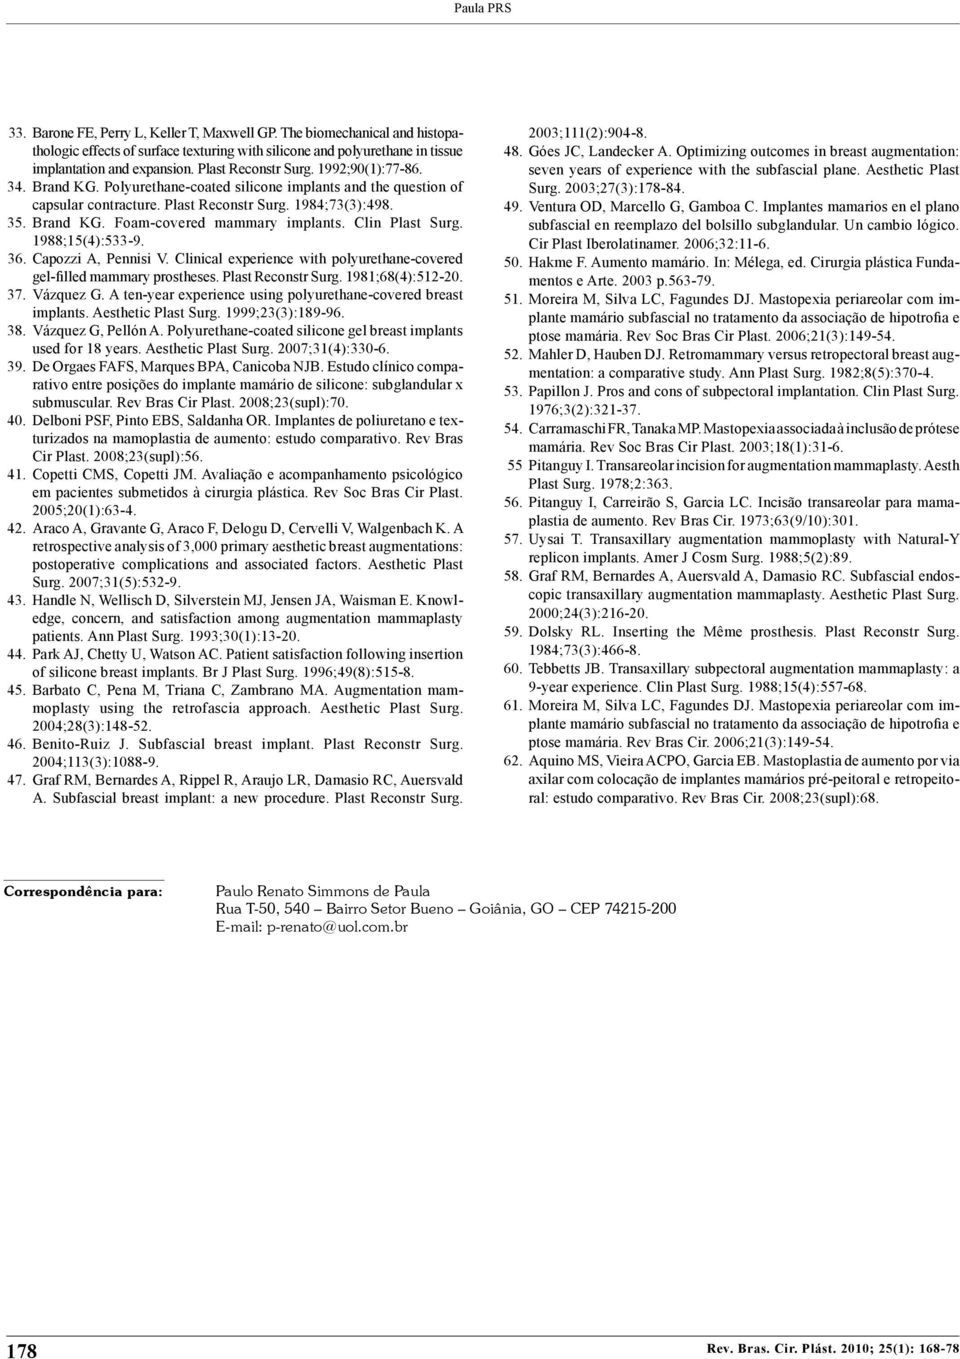 Clin Plast Surg. 1988;15(4):533-9. 36. Capozzi A, Pennisi V. Clinical experience with polyurethane-covered gel-filled mammary prostheses. Plast Reconstr Surg. 1981;68(4):512-20. 37. Vázquez G.